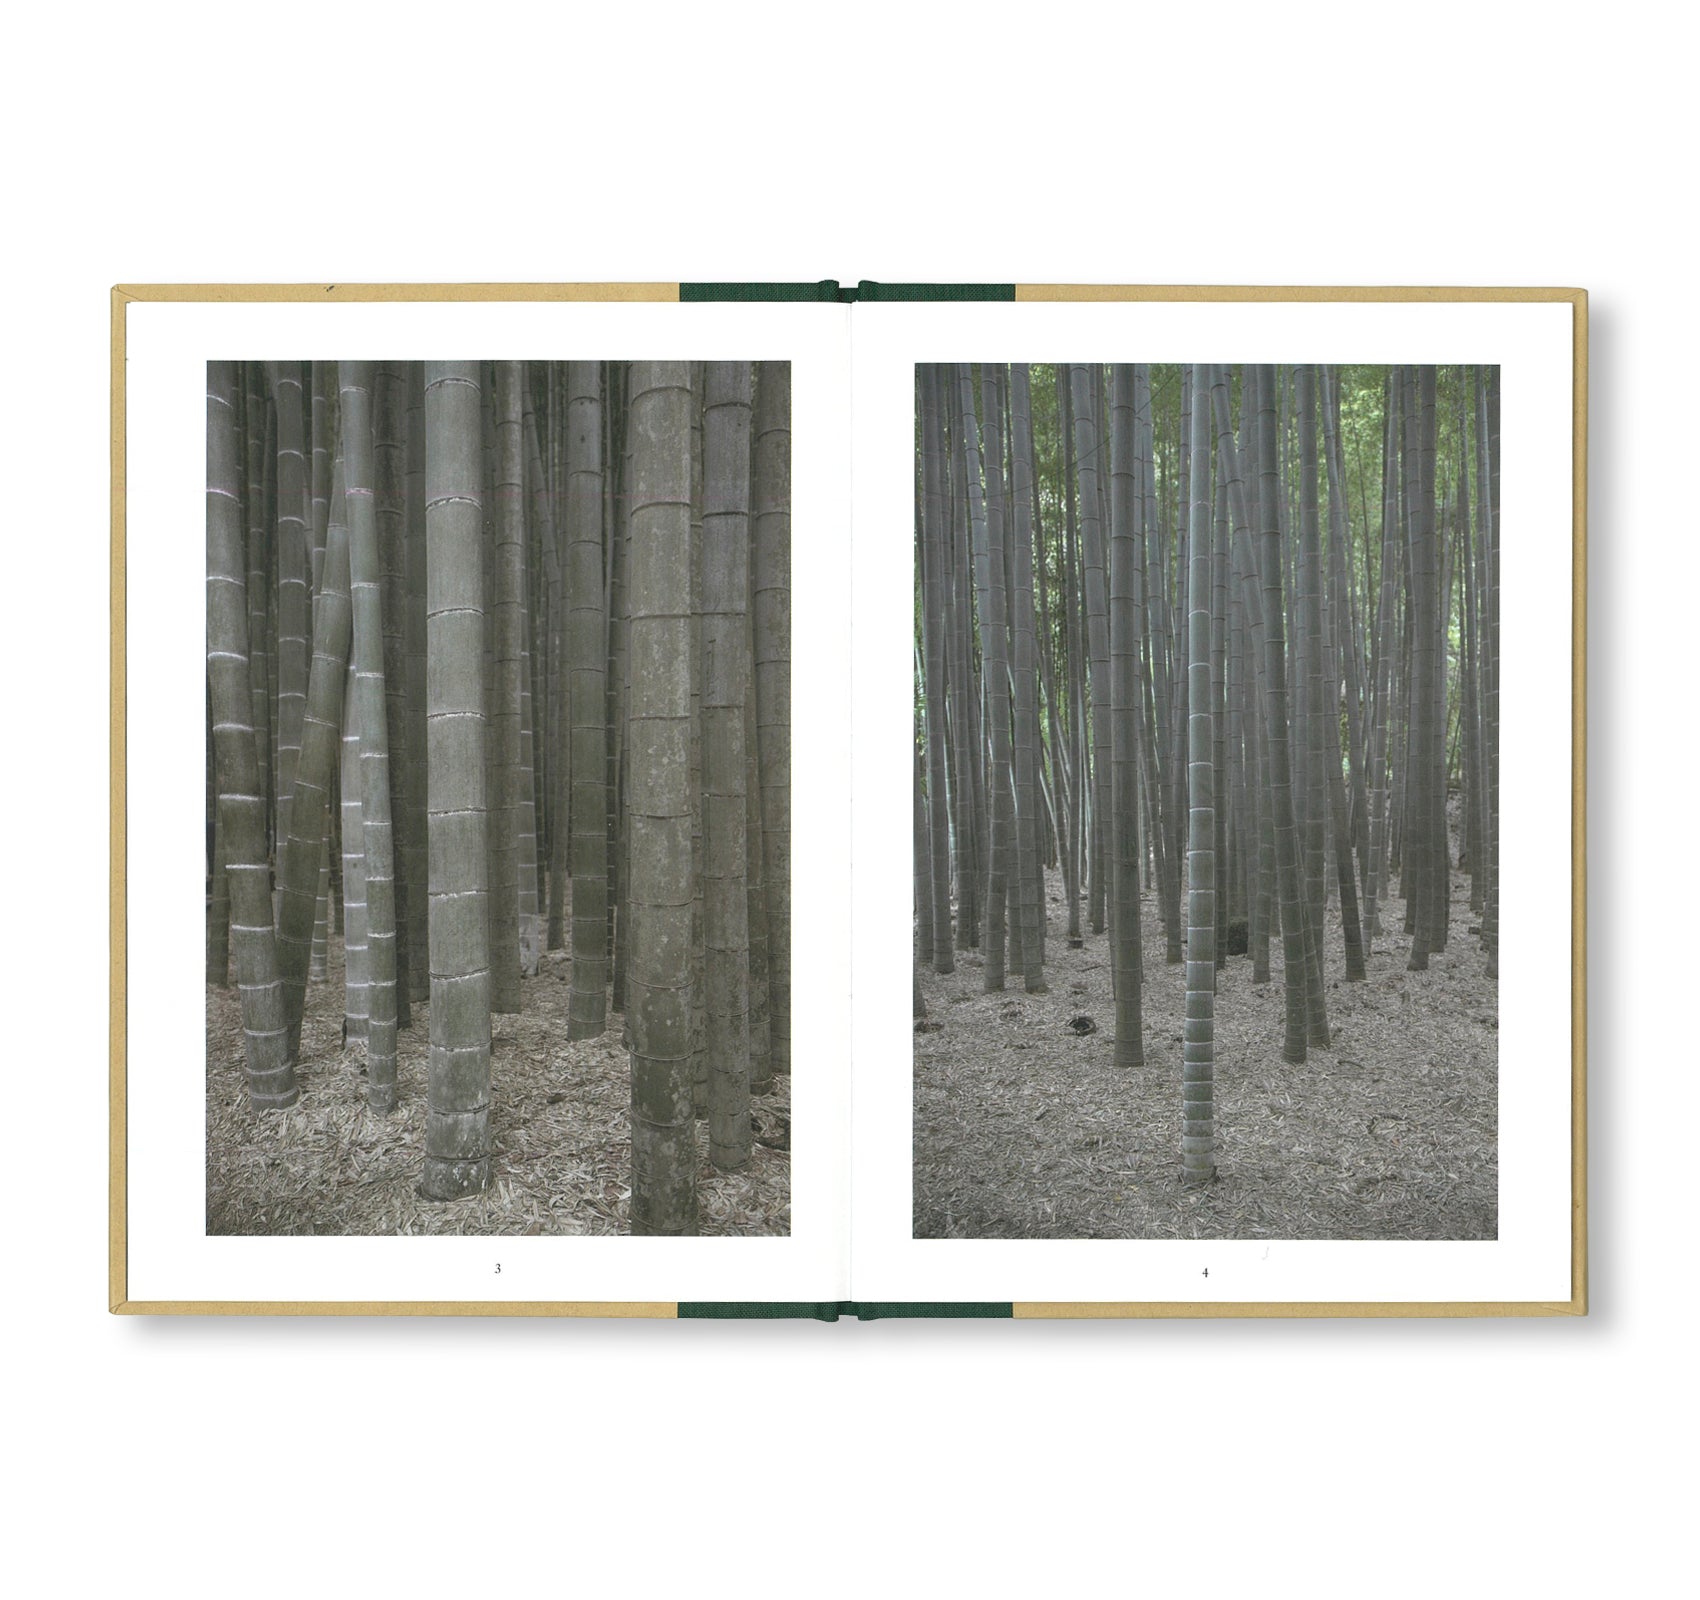 ONE PICTURE BOOK TWO #18: A WALK THROUGH A BAMBOO GROVE by David H. Gibson